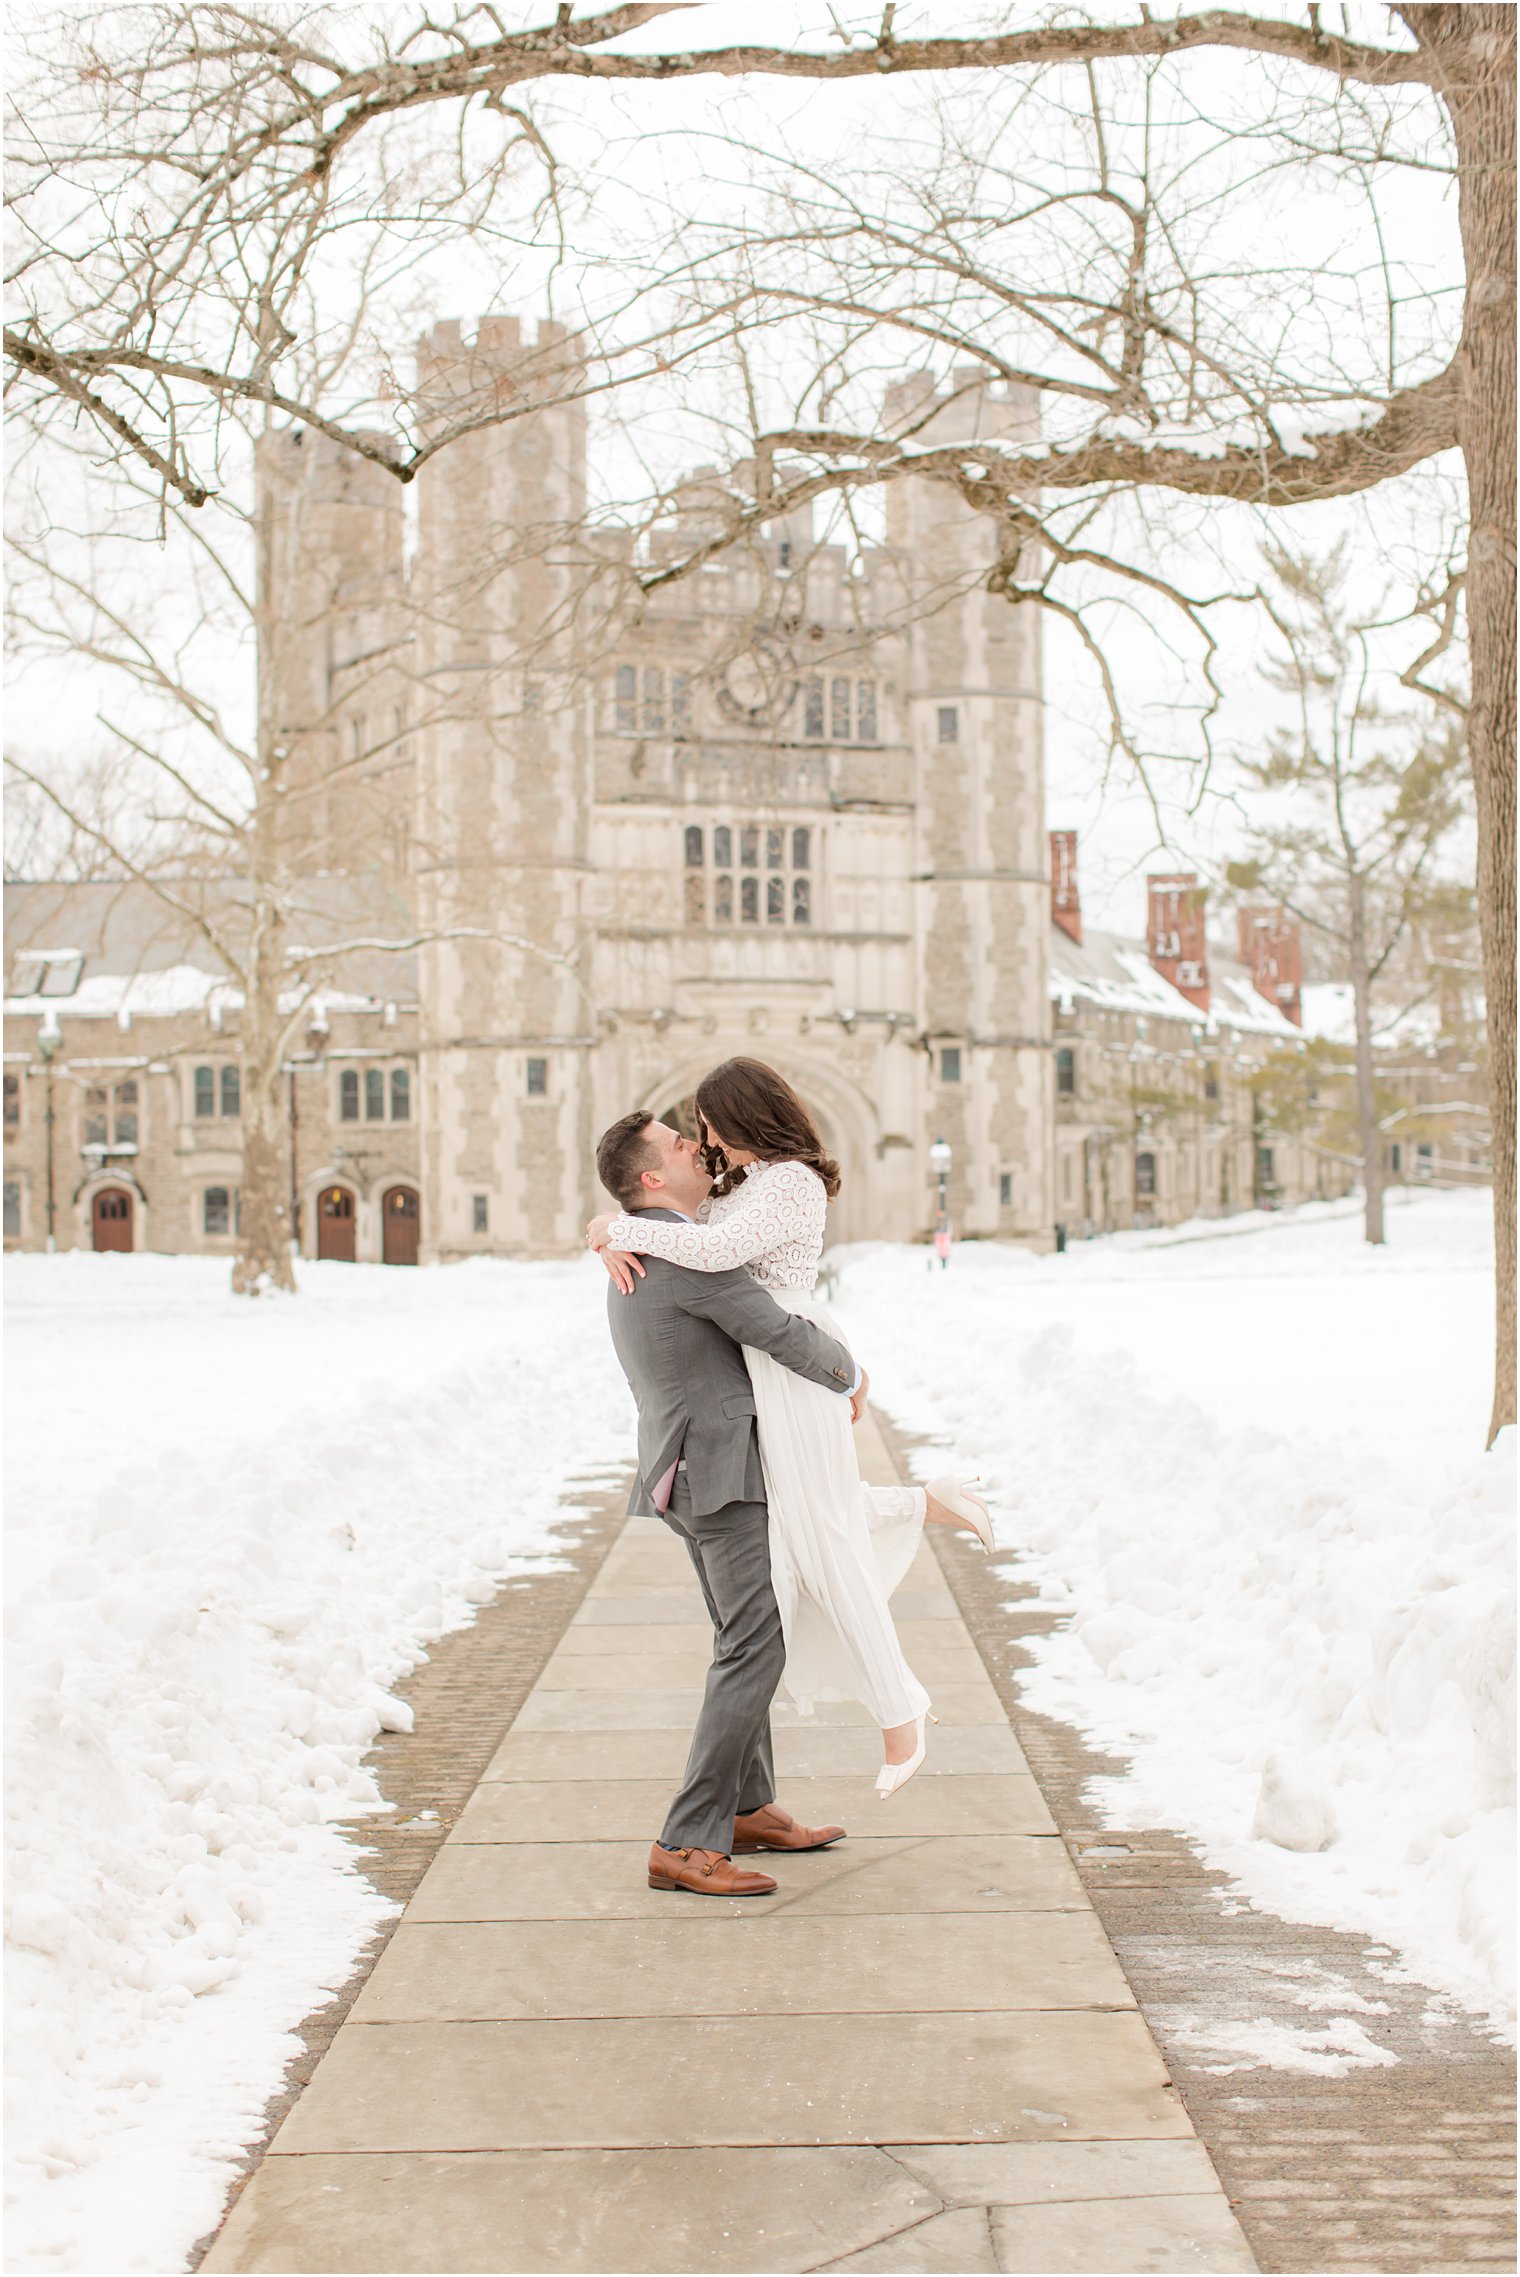 groom lifts bride in front of Princeton University on snowy wedding day